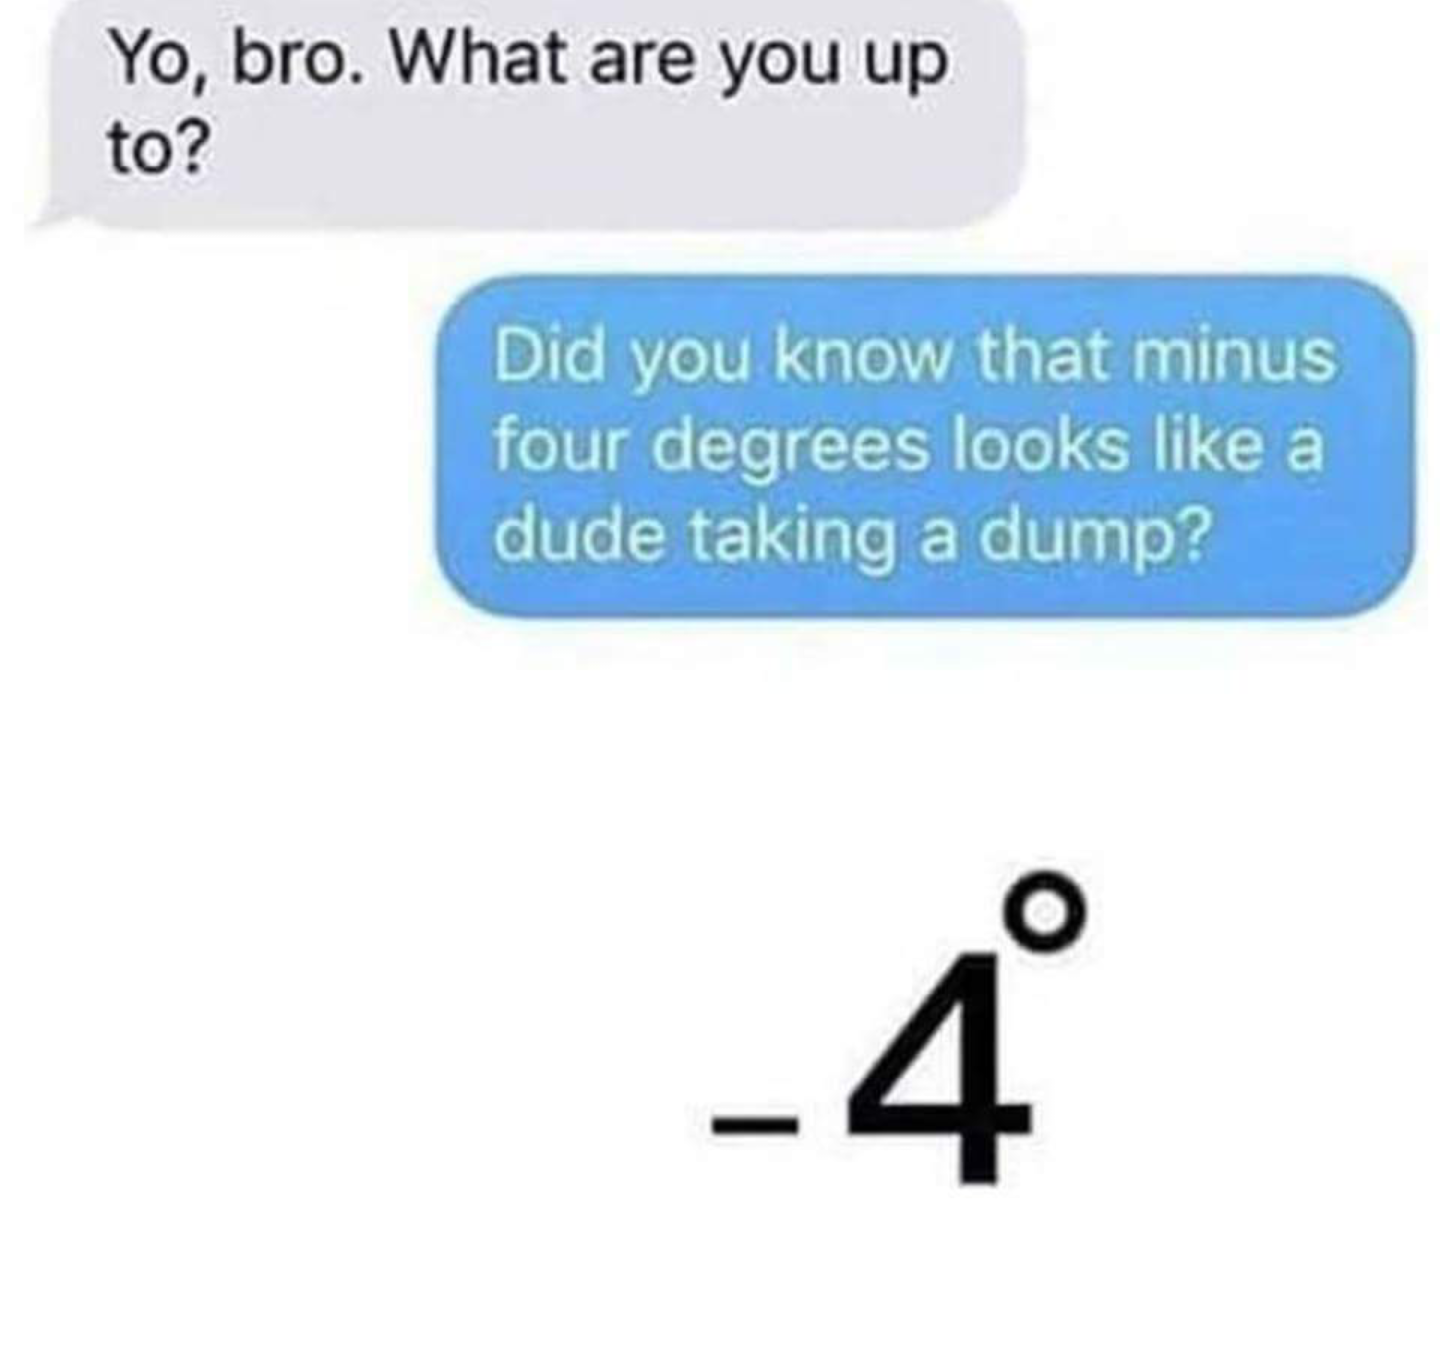 4 degrees meme - Yo, bro. What are you up to? Did you know that minus four degrees looks a dude taking a dump?